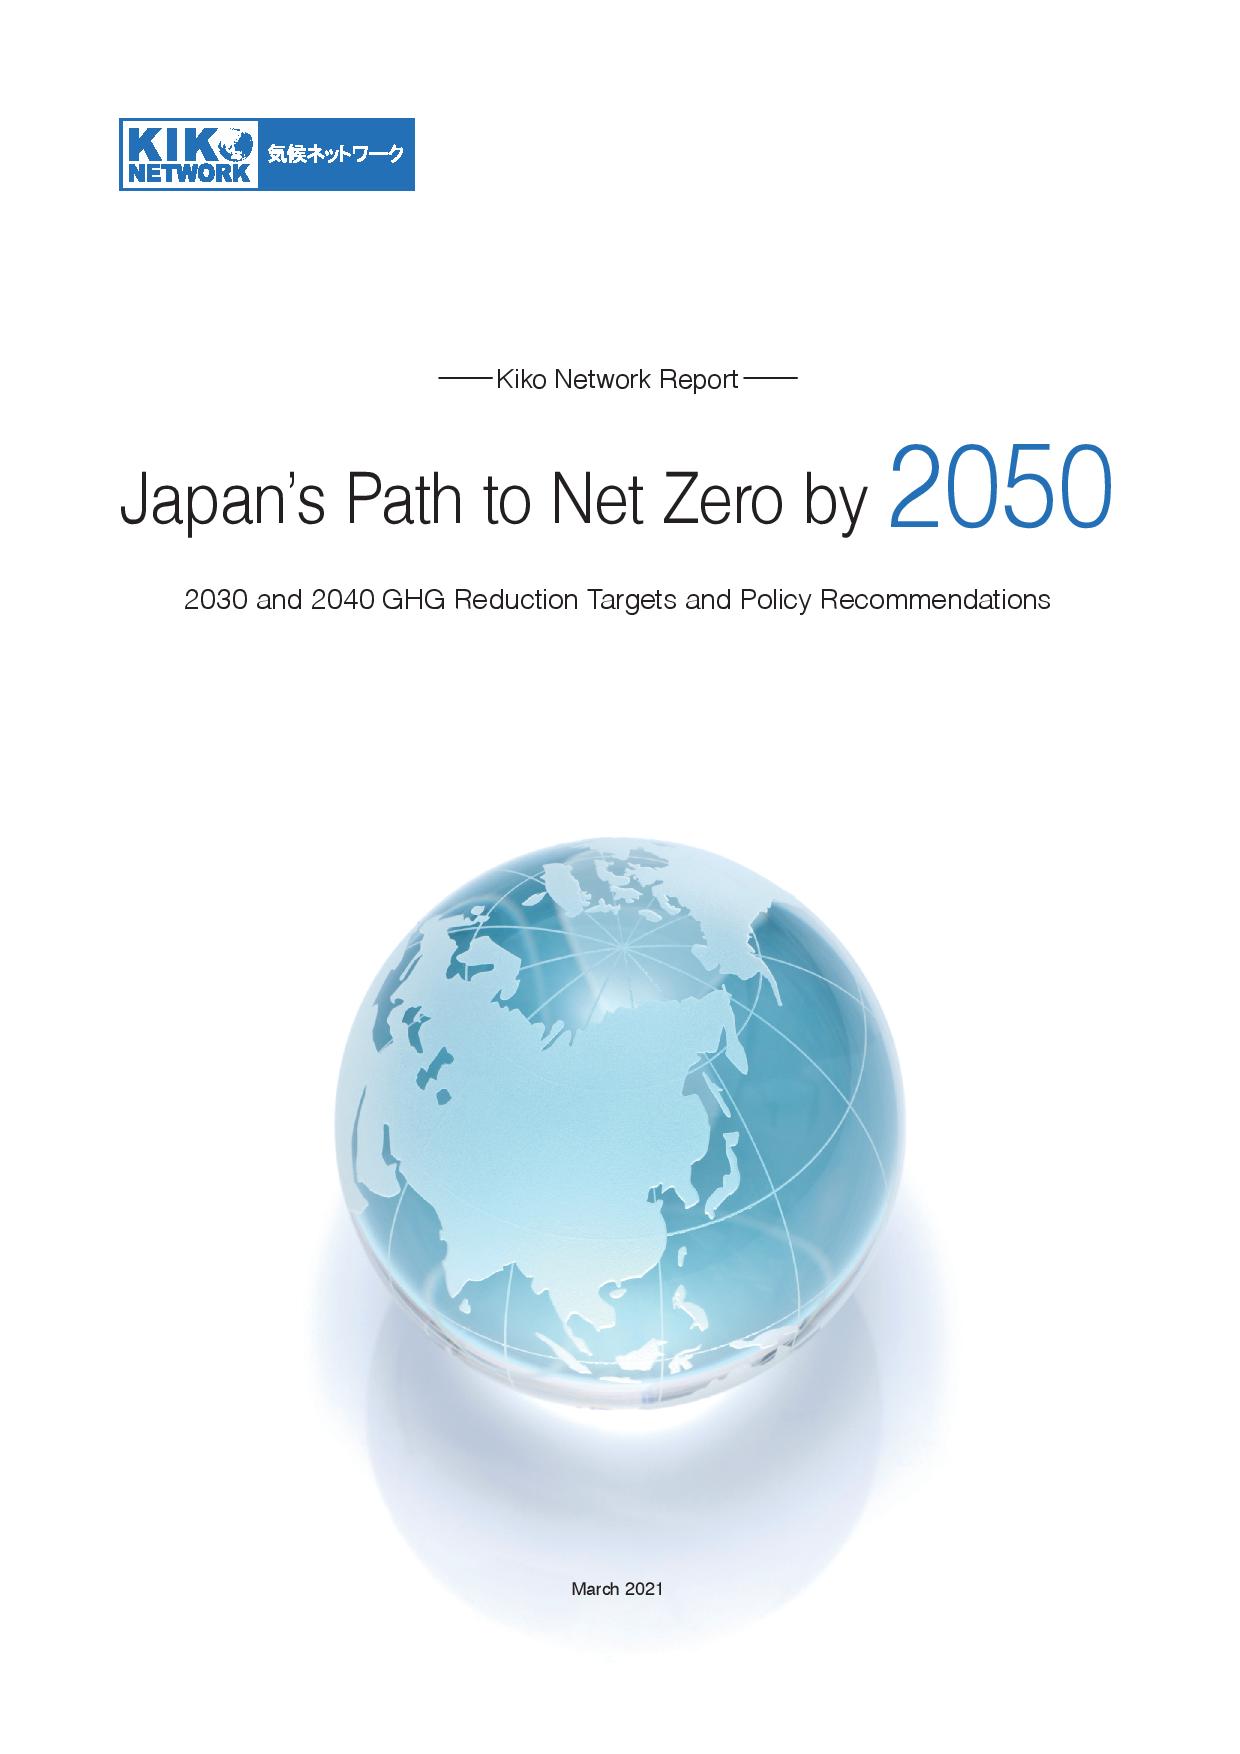 【Report】Kiko Network recommendation report “Japan’s Path to Net Zero by 2050”